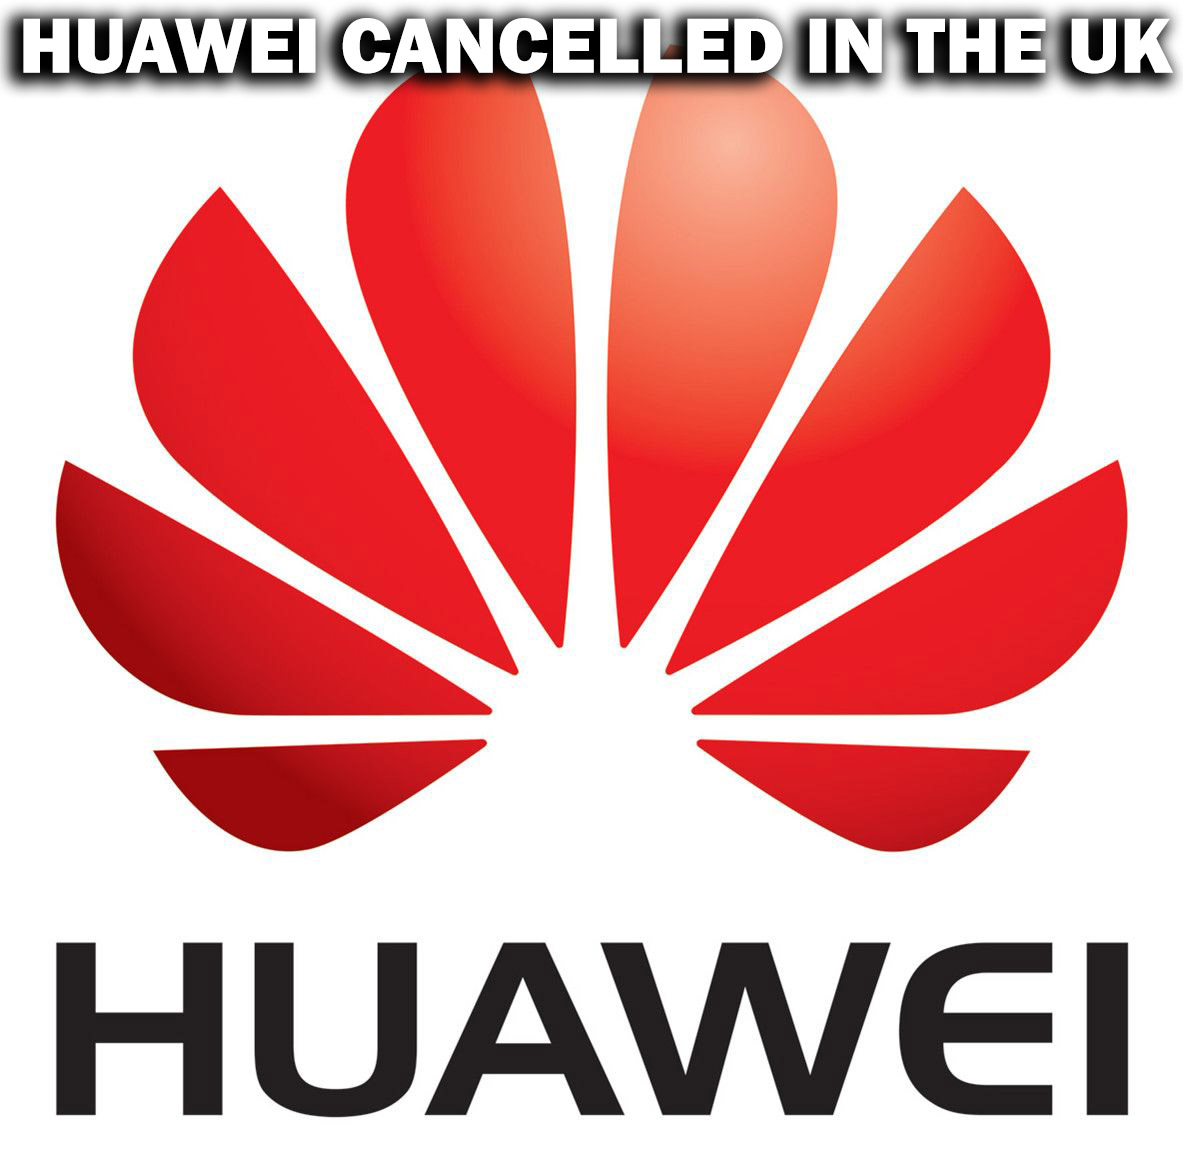 HUAWEI CANCELLED IN THE UK